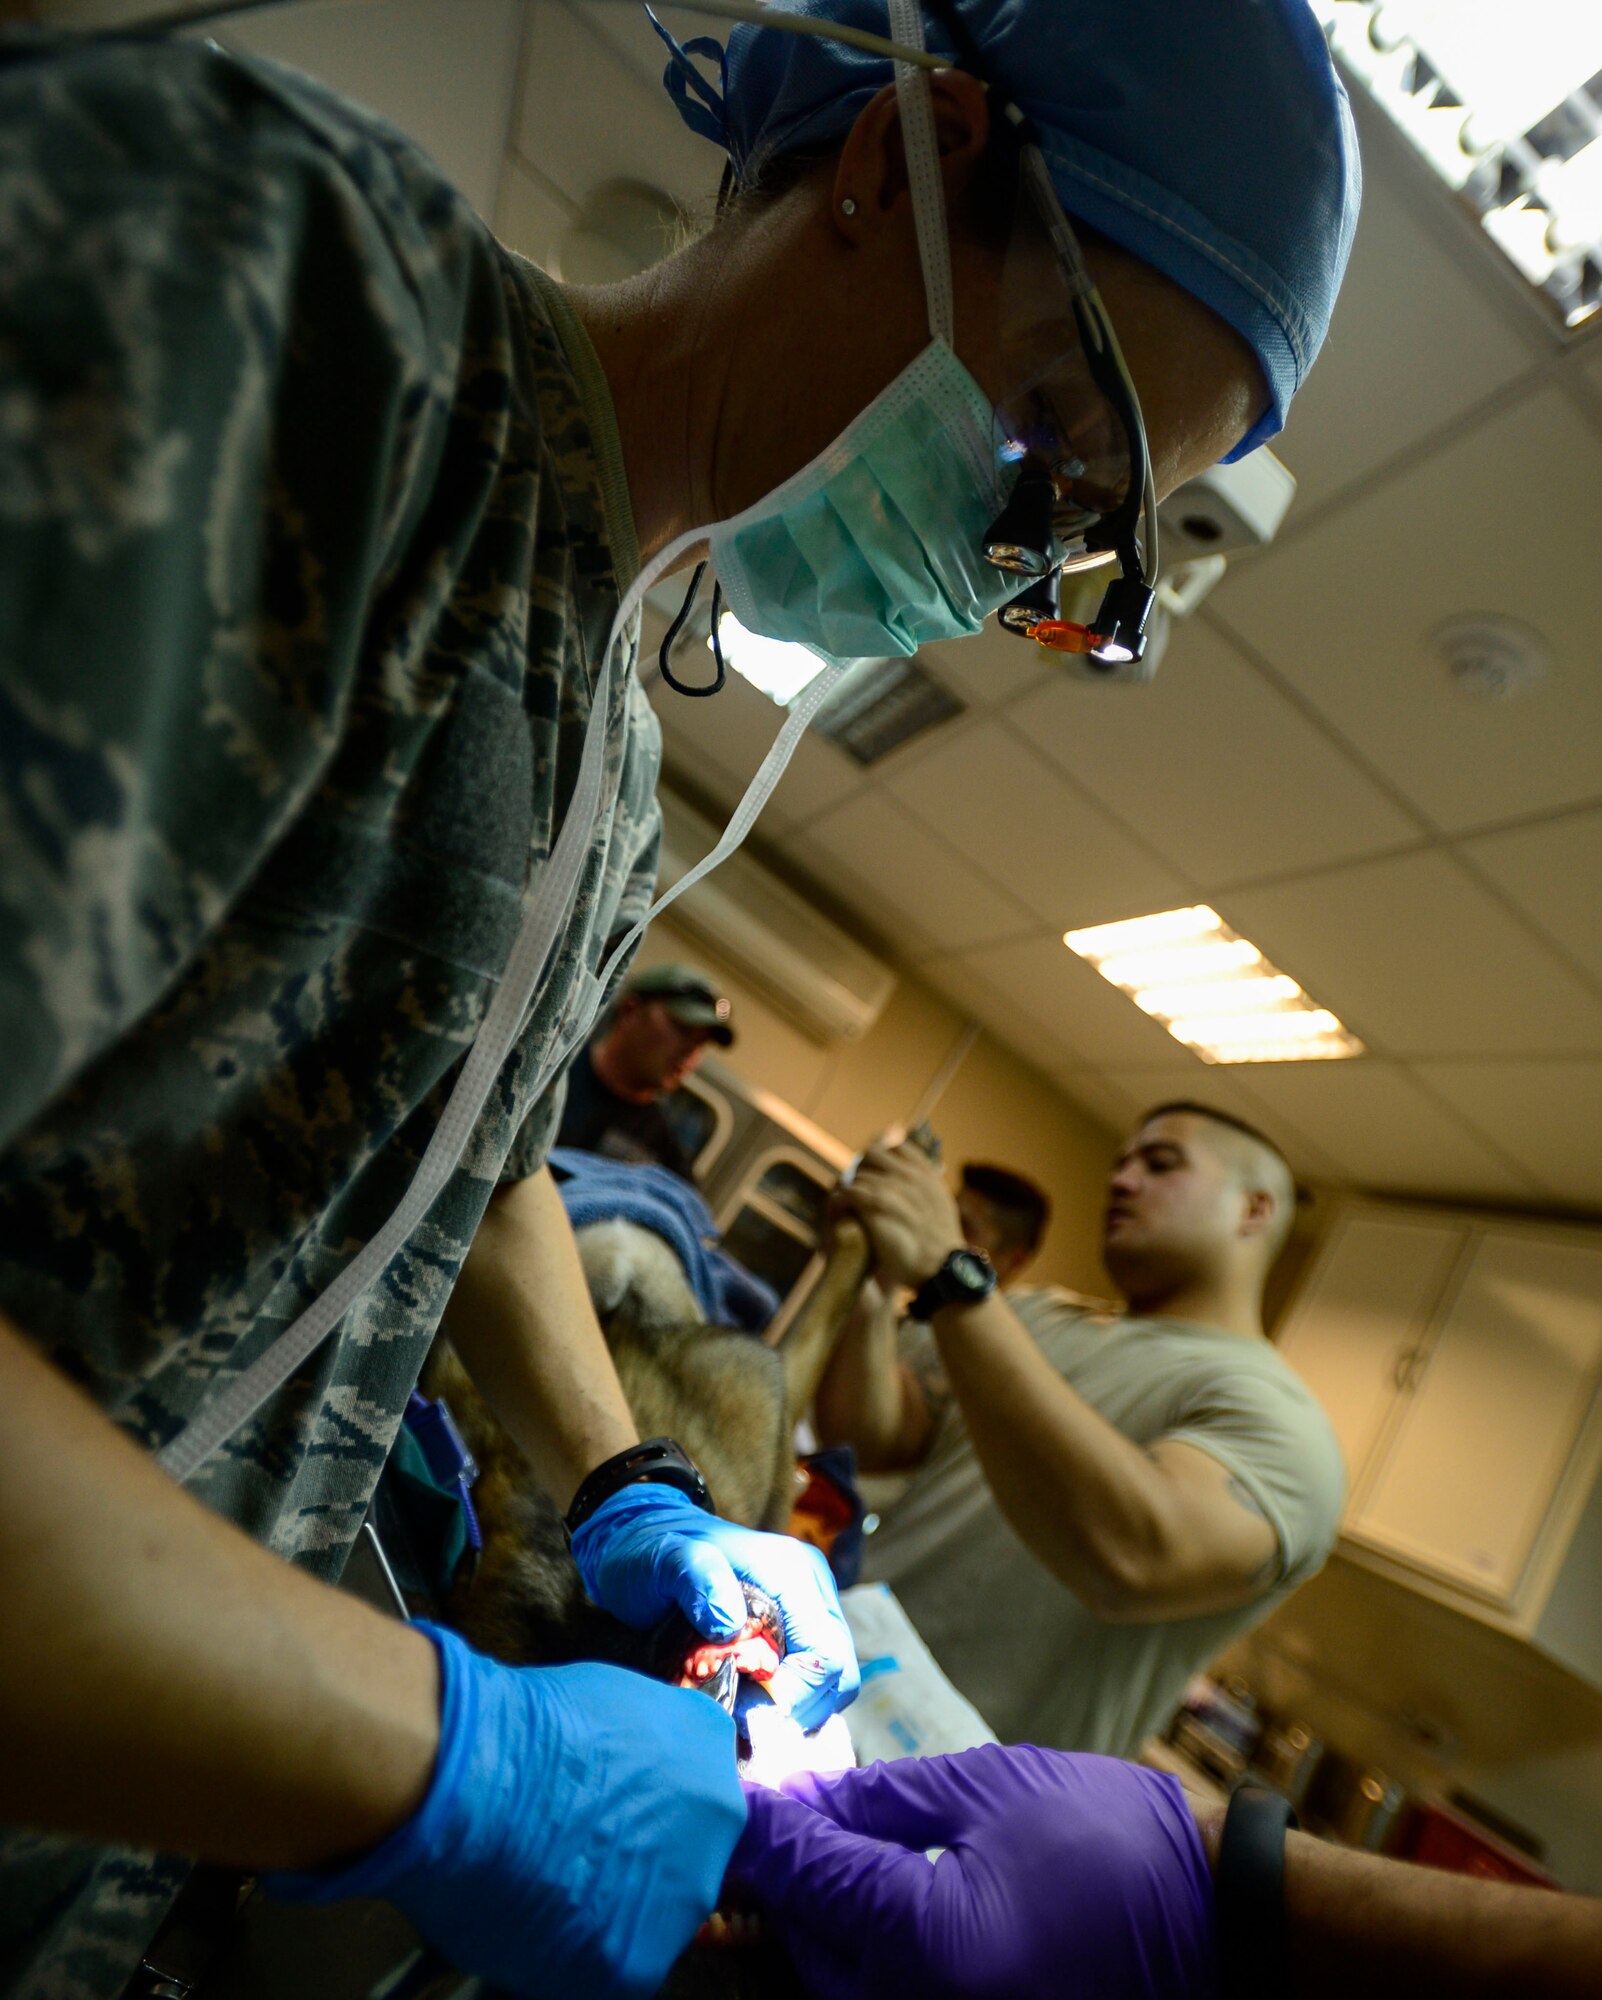 U.S. Air Force Capt. Marie Cross, 386th Expeditionary Medical Group general dentist, performs a tooth extraction procedure on a military working dog at an undisclosed location in Southwest Asia, Sept. 24, 2015. A dental extraction is the removal of teeth from the dental socket which, performed for a variety of reasons, include teeth that are restorable due to tooth decay, periodontal disease or dental trauma. (U.S. Air Force photo by Senior Airman Racheal E. Watson/Released) 